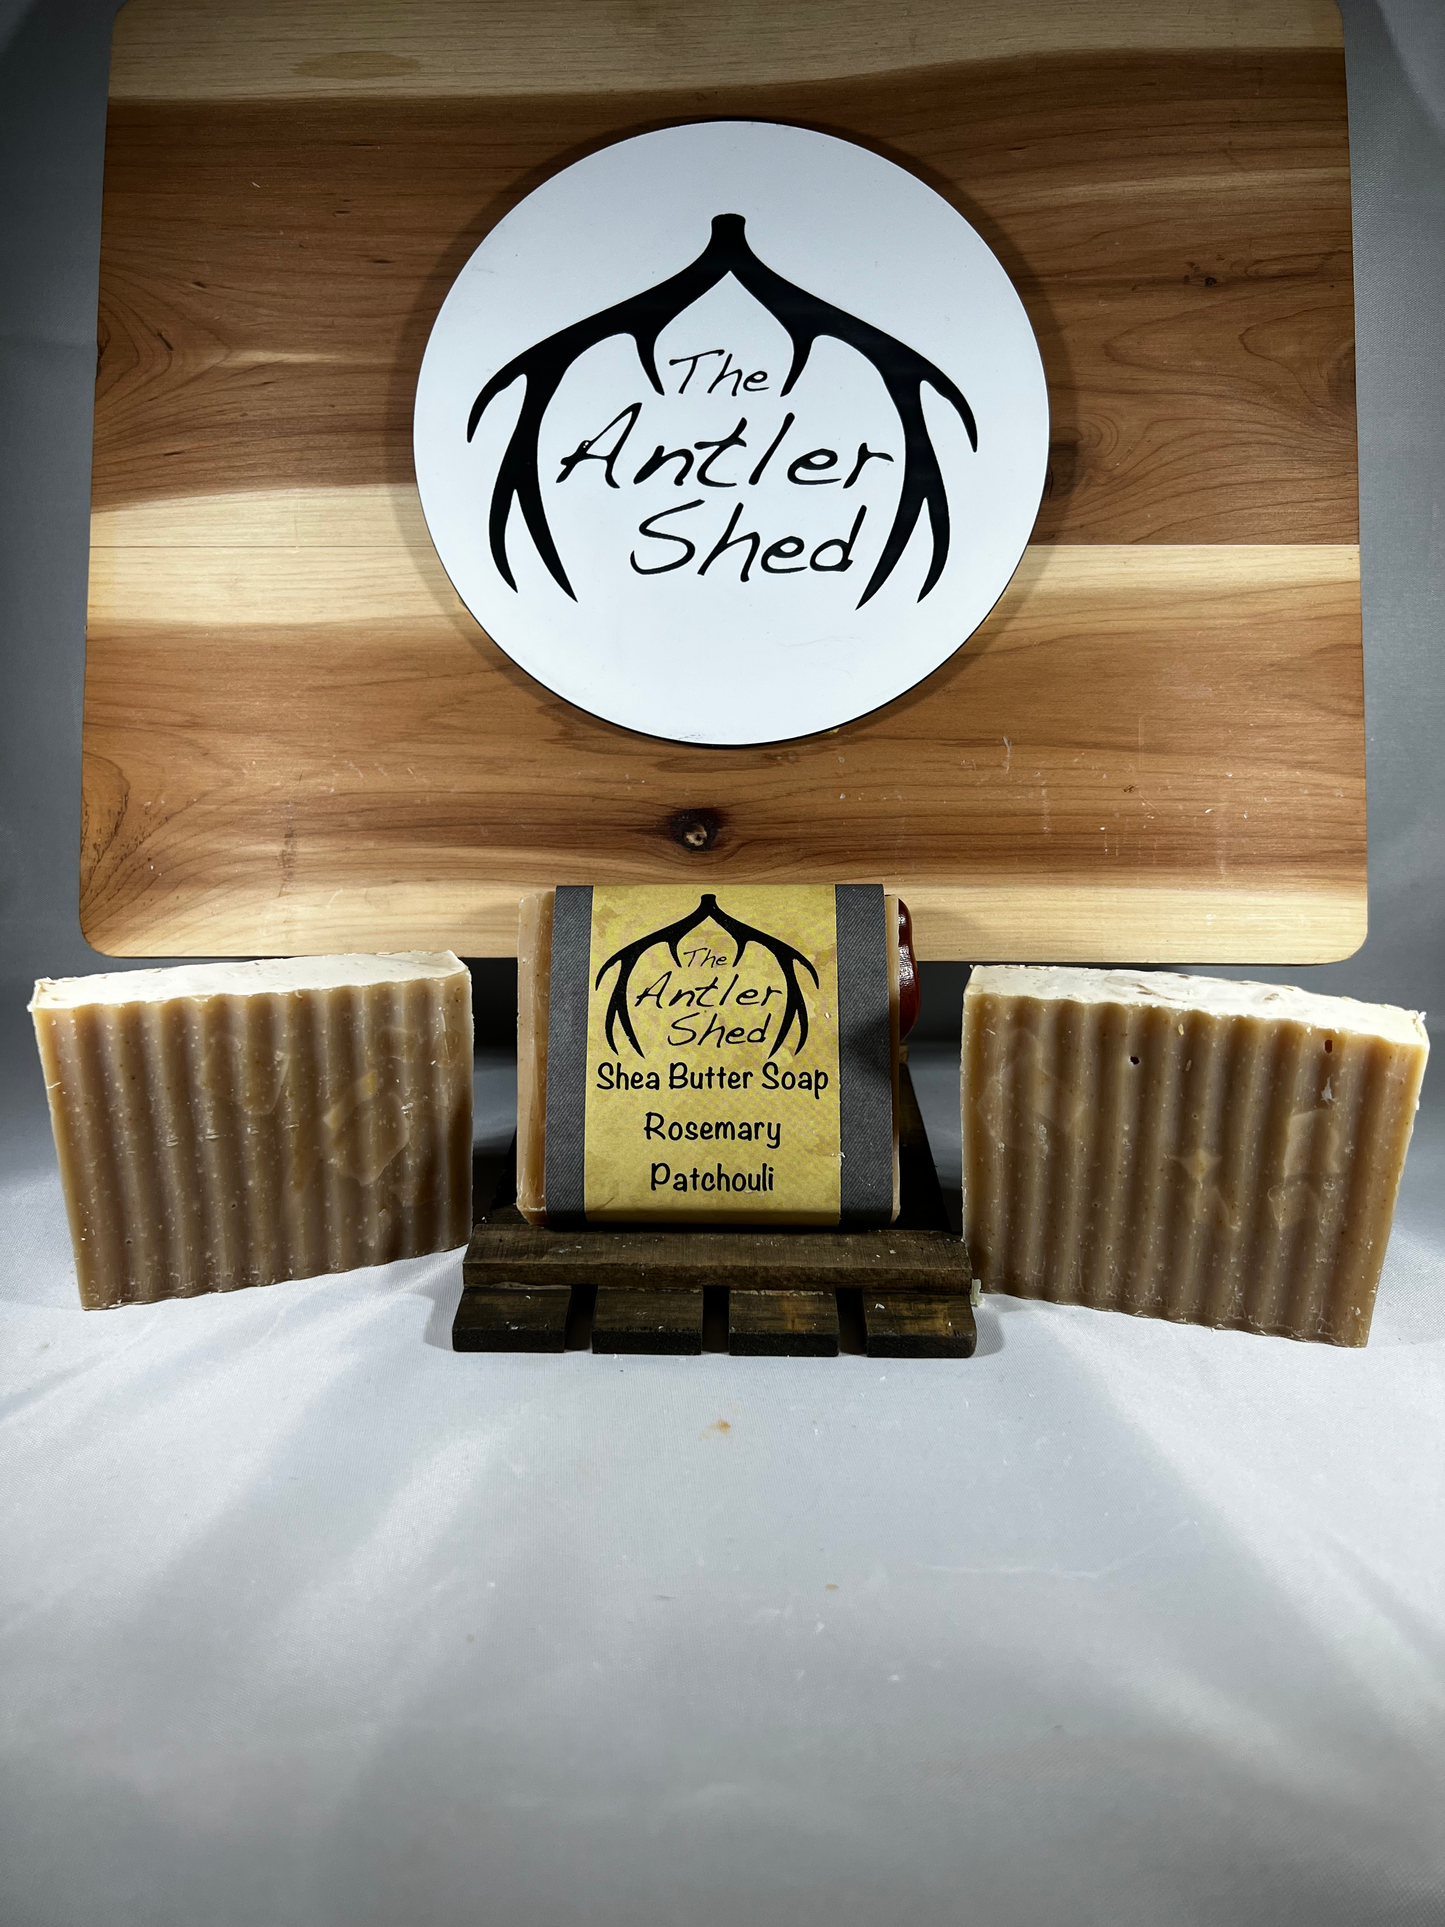 Rosemary Patchouli Shea Butter Soap